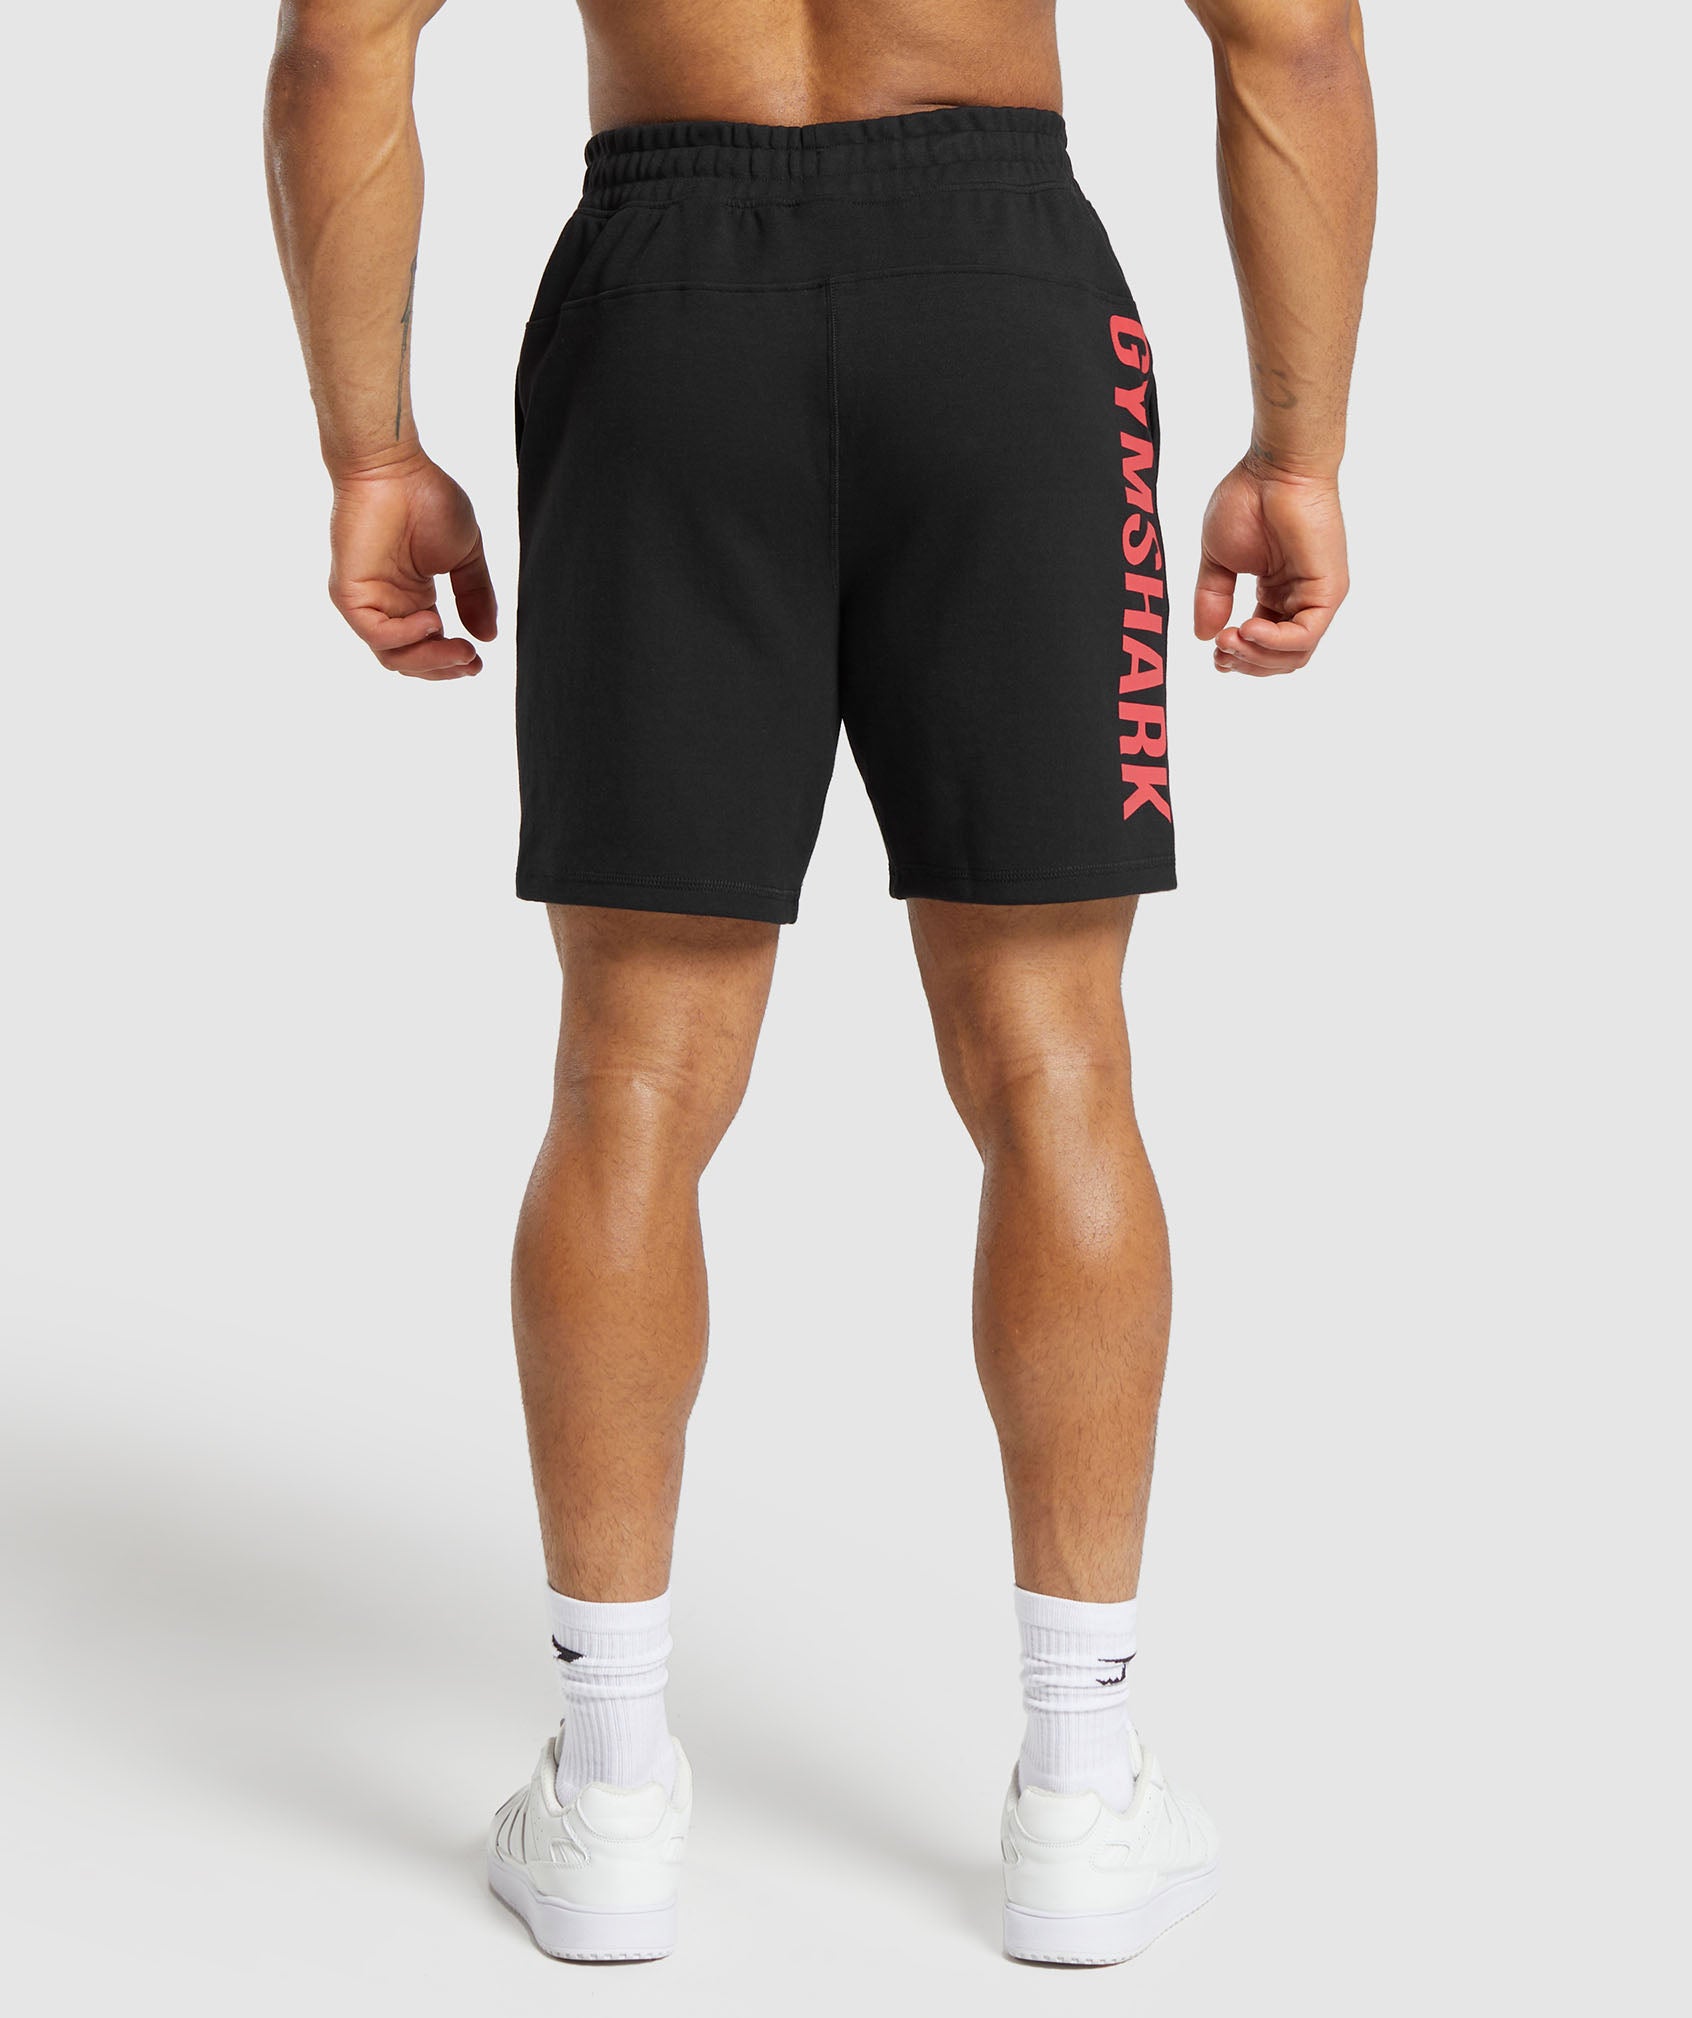 Impact Shorts in Black/Vivid Red - view 3